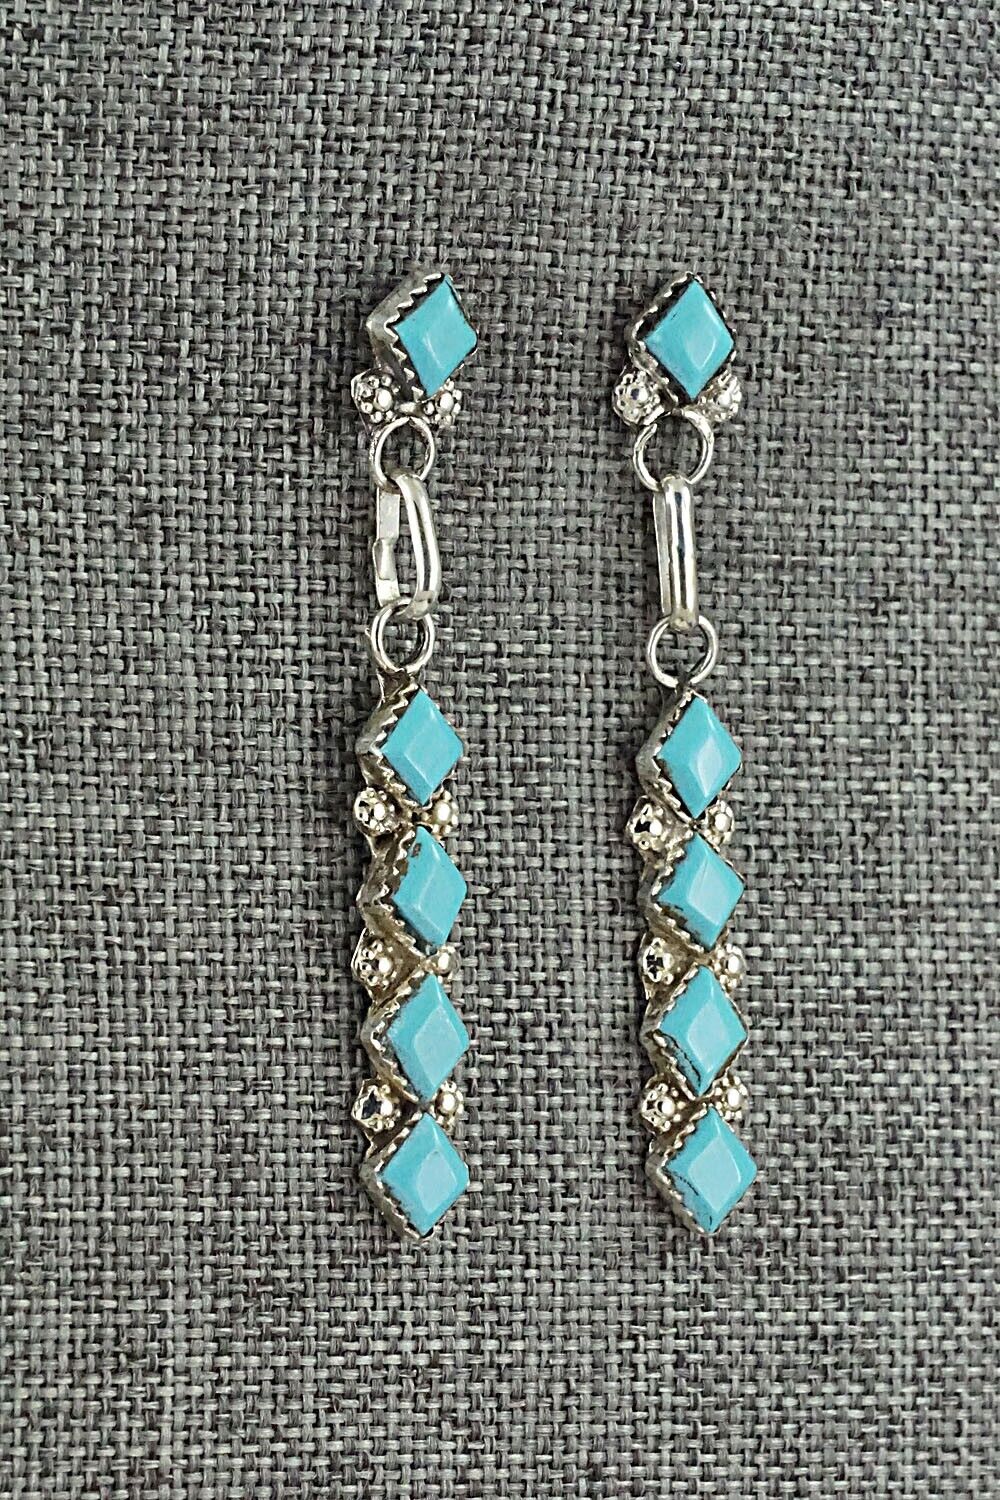 Turquoise & Sterling Silver Earrings - Olivia Qualo